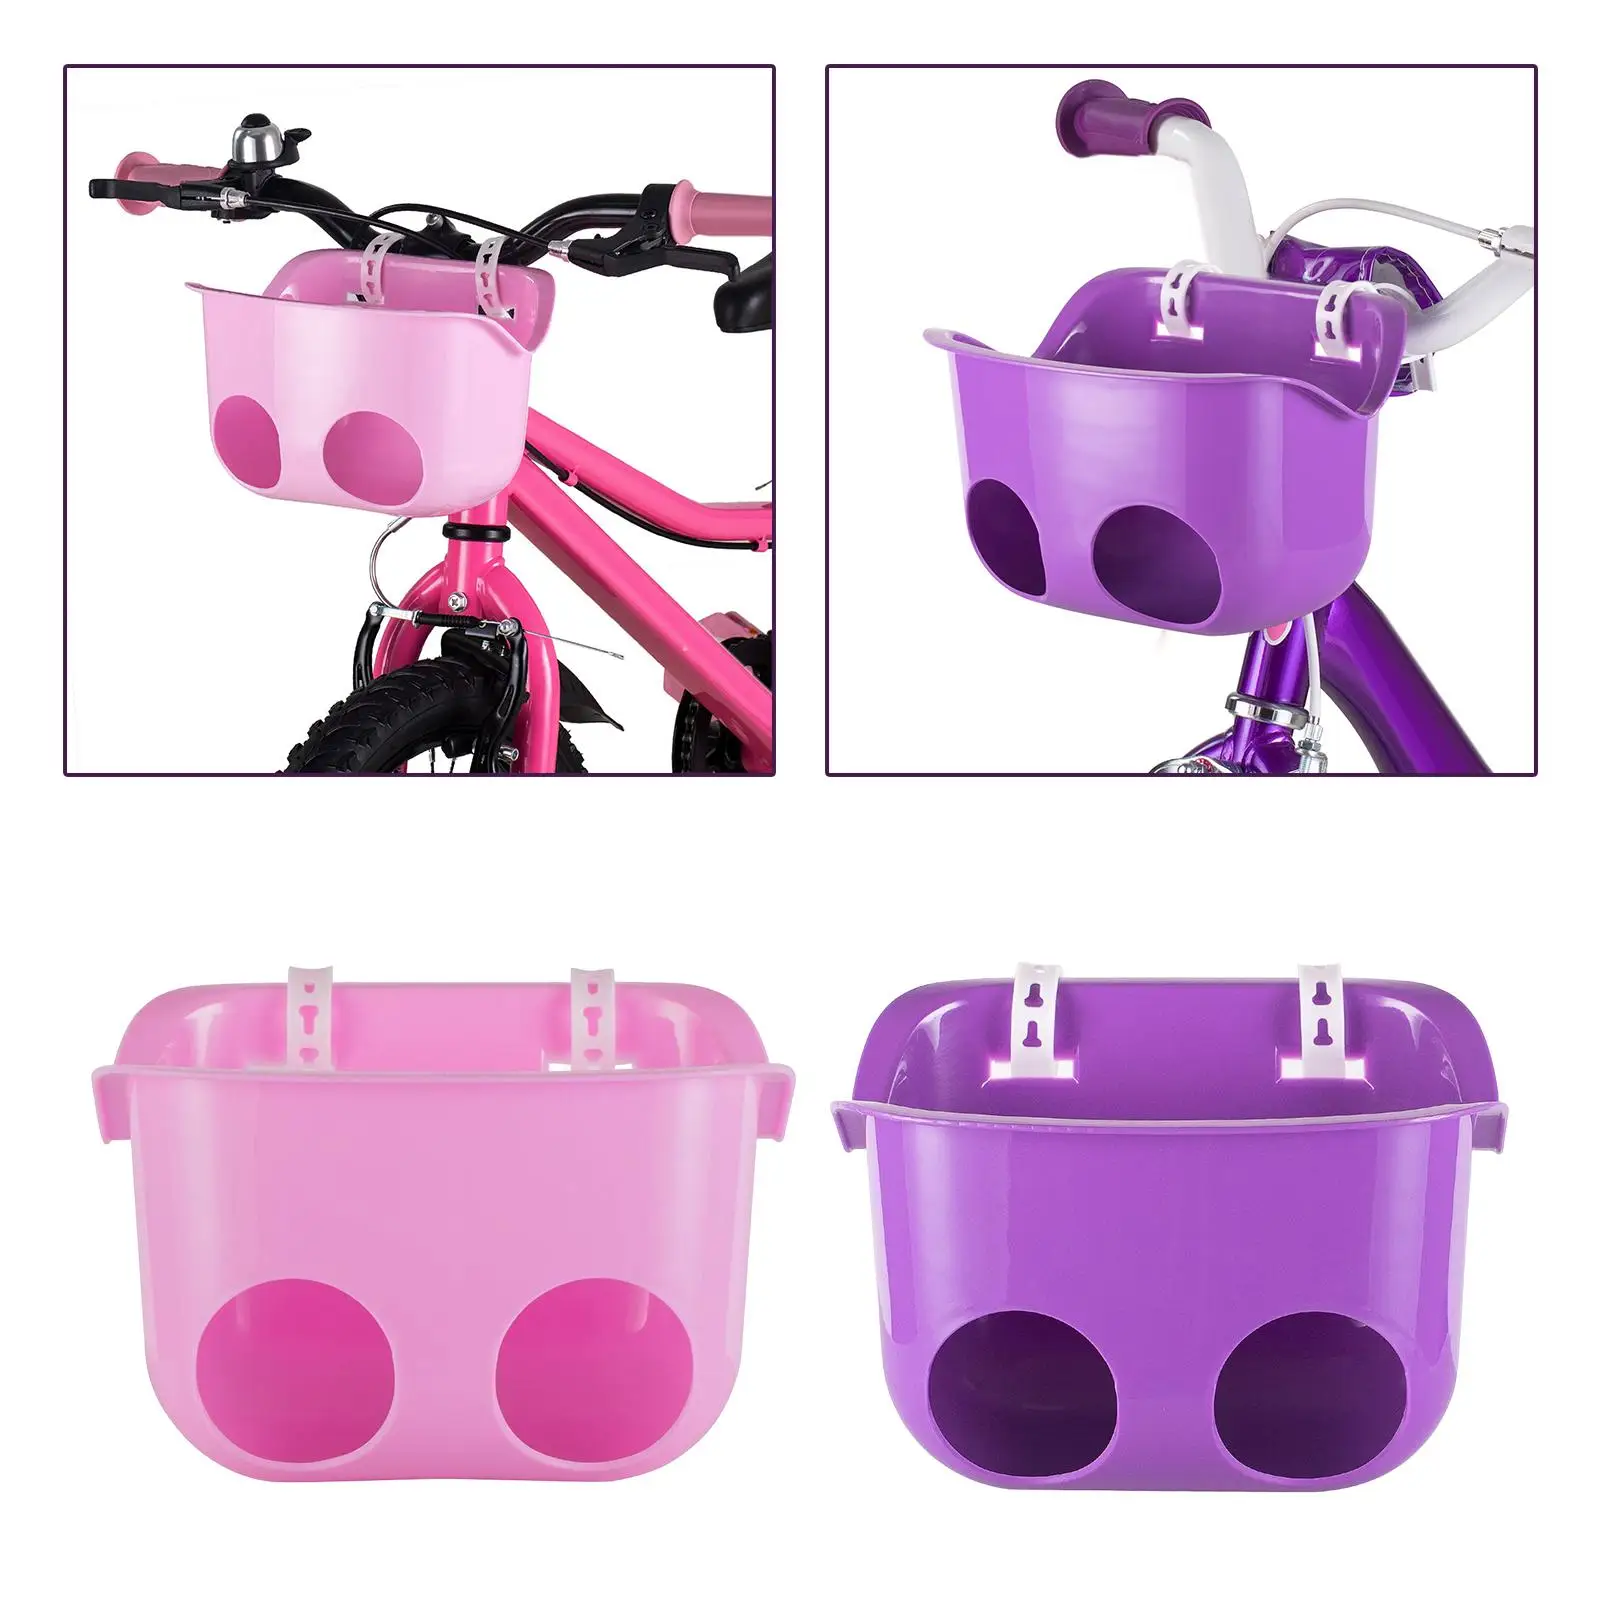 Portable Kids Bicycle Basket doll Seat Simple to Install Quick Release Adjustable Detachable with Strap for Outdoor Riding